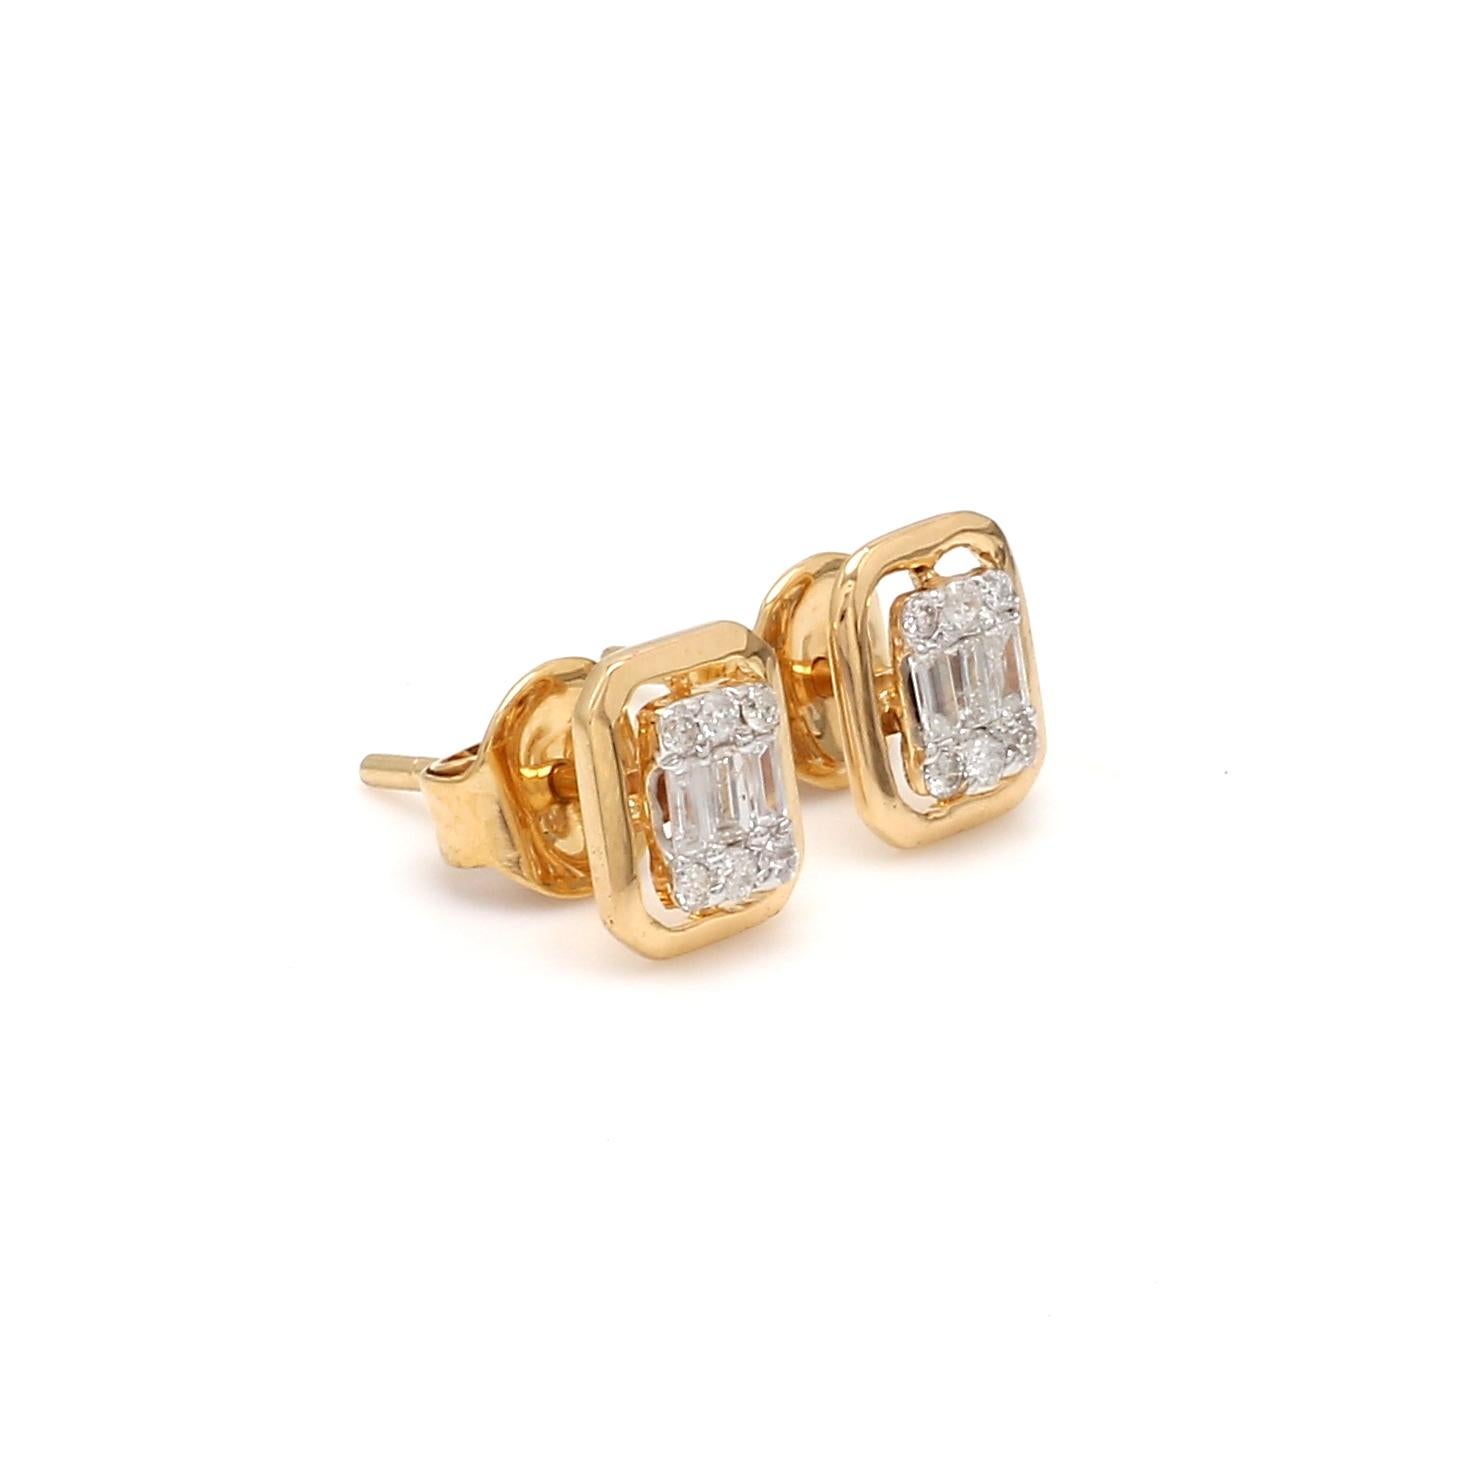 Item Code :- CN-31602
Gross Wt. :- 1.75 gm
18k Yellow Gold Wt. :- 1.70 gm
Natural Diamond Wt. :- 0.25 Ct. ( AVERAGE DIAMOND CLARITY SI1-SI2 & COLOR H-I )
Earrings Size :- 7.91 x 6.61 mm approx.

✦ Sizing
.....................
We can adjust most